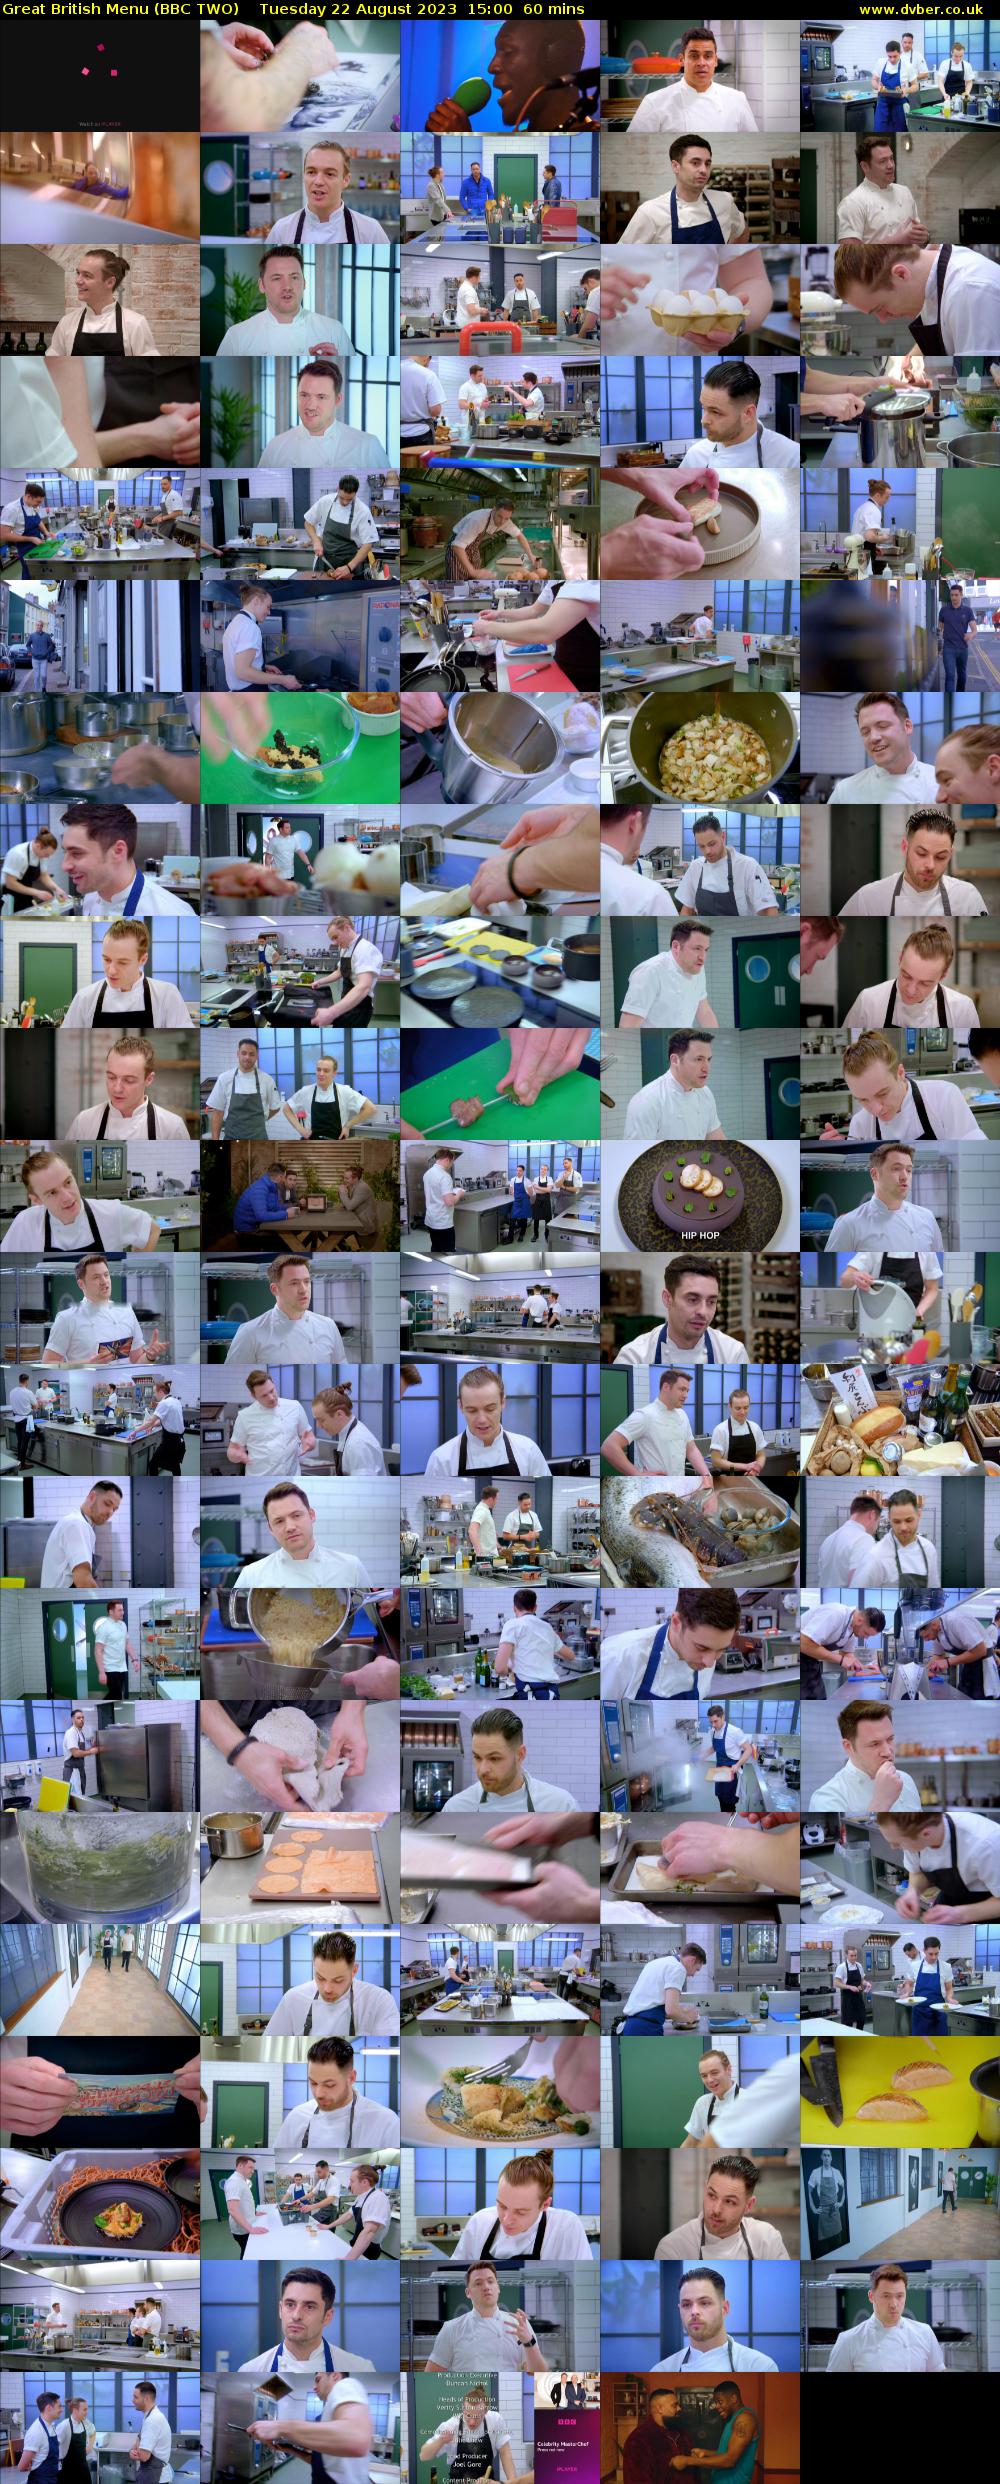 Great British Menu (BBC TWO) Tuesday 22 August 2023 15:00 - 16:00